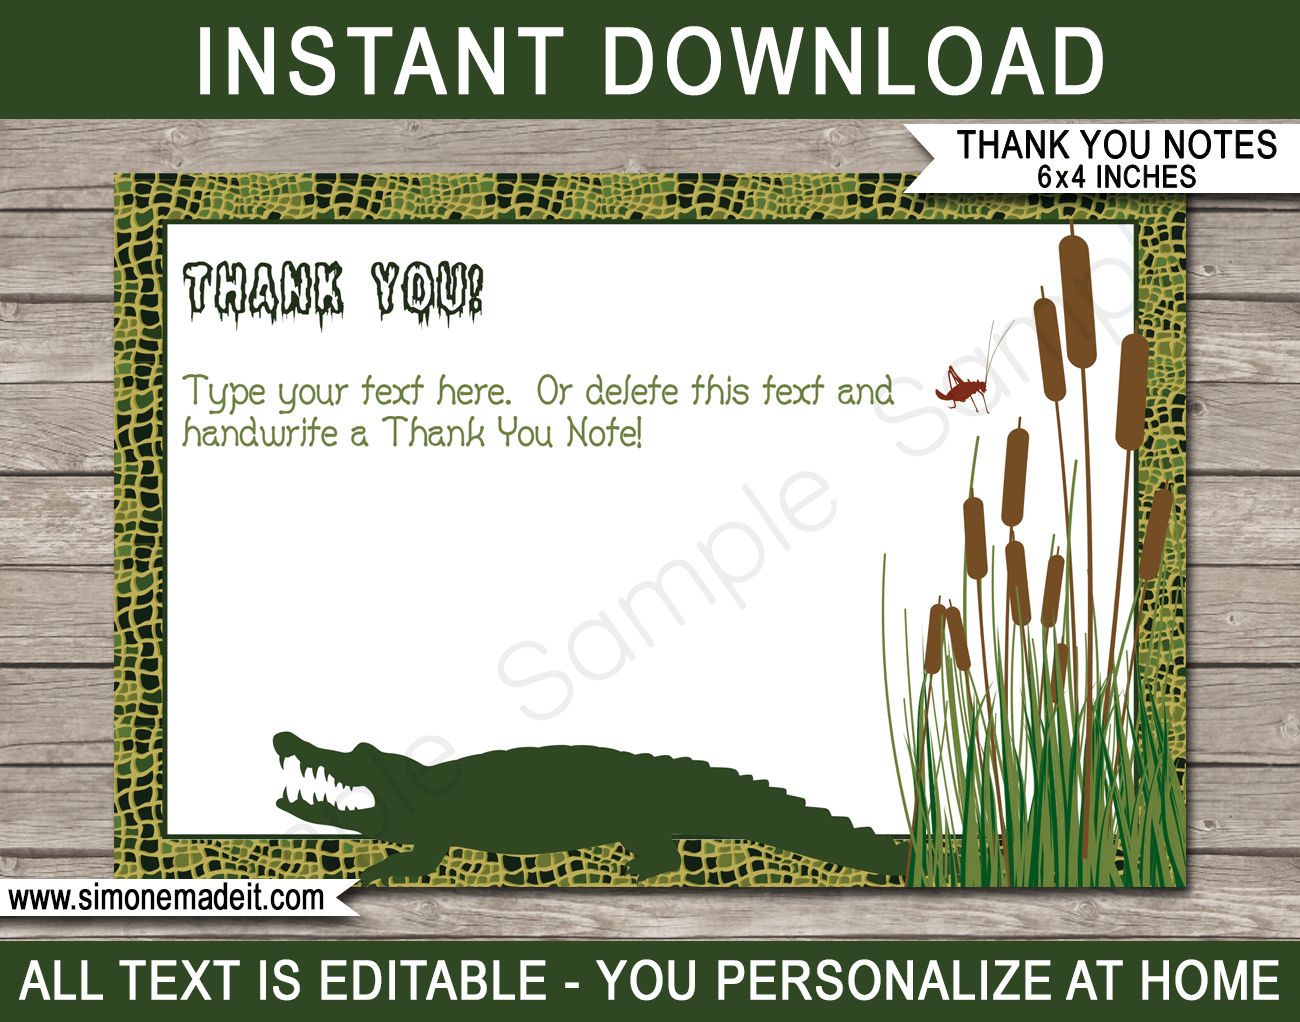 Printable Swamp Birthday Party Thank You Card Template - Favor Note Tags - Editable Text - Instant Download via simonemadeit.com